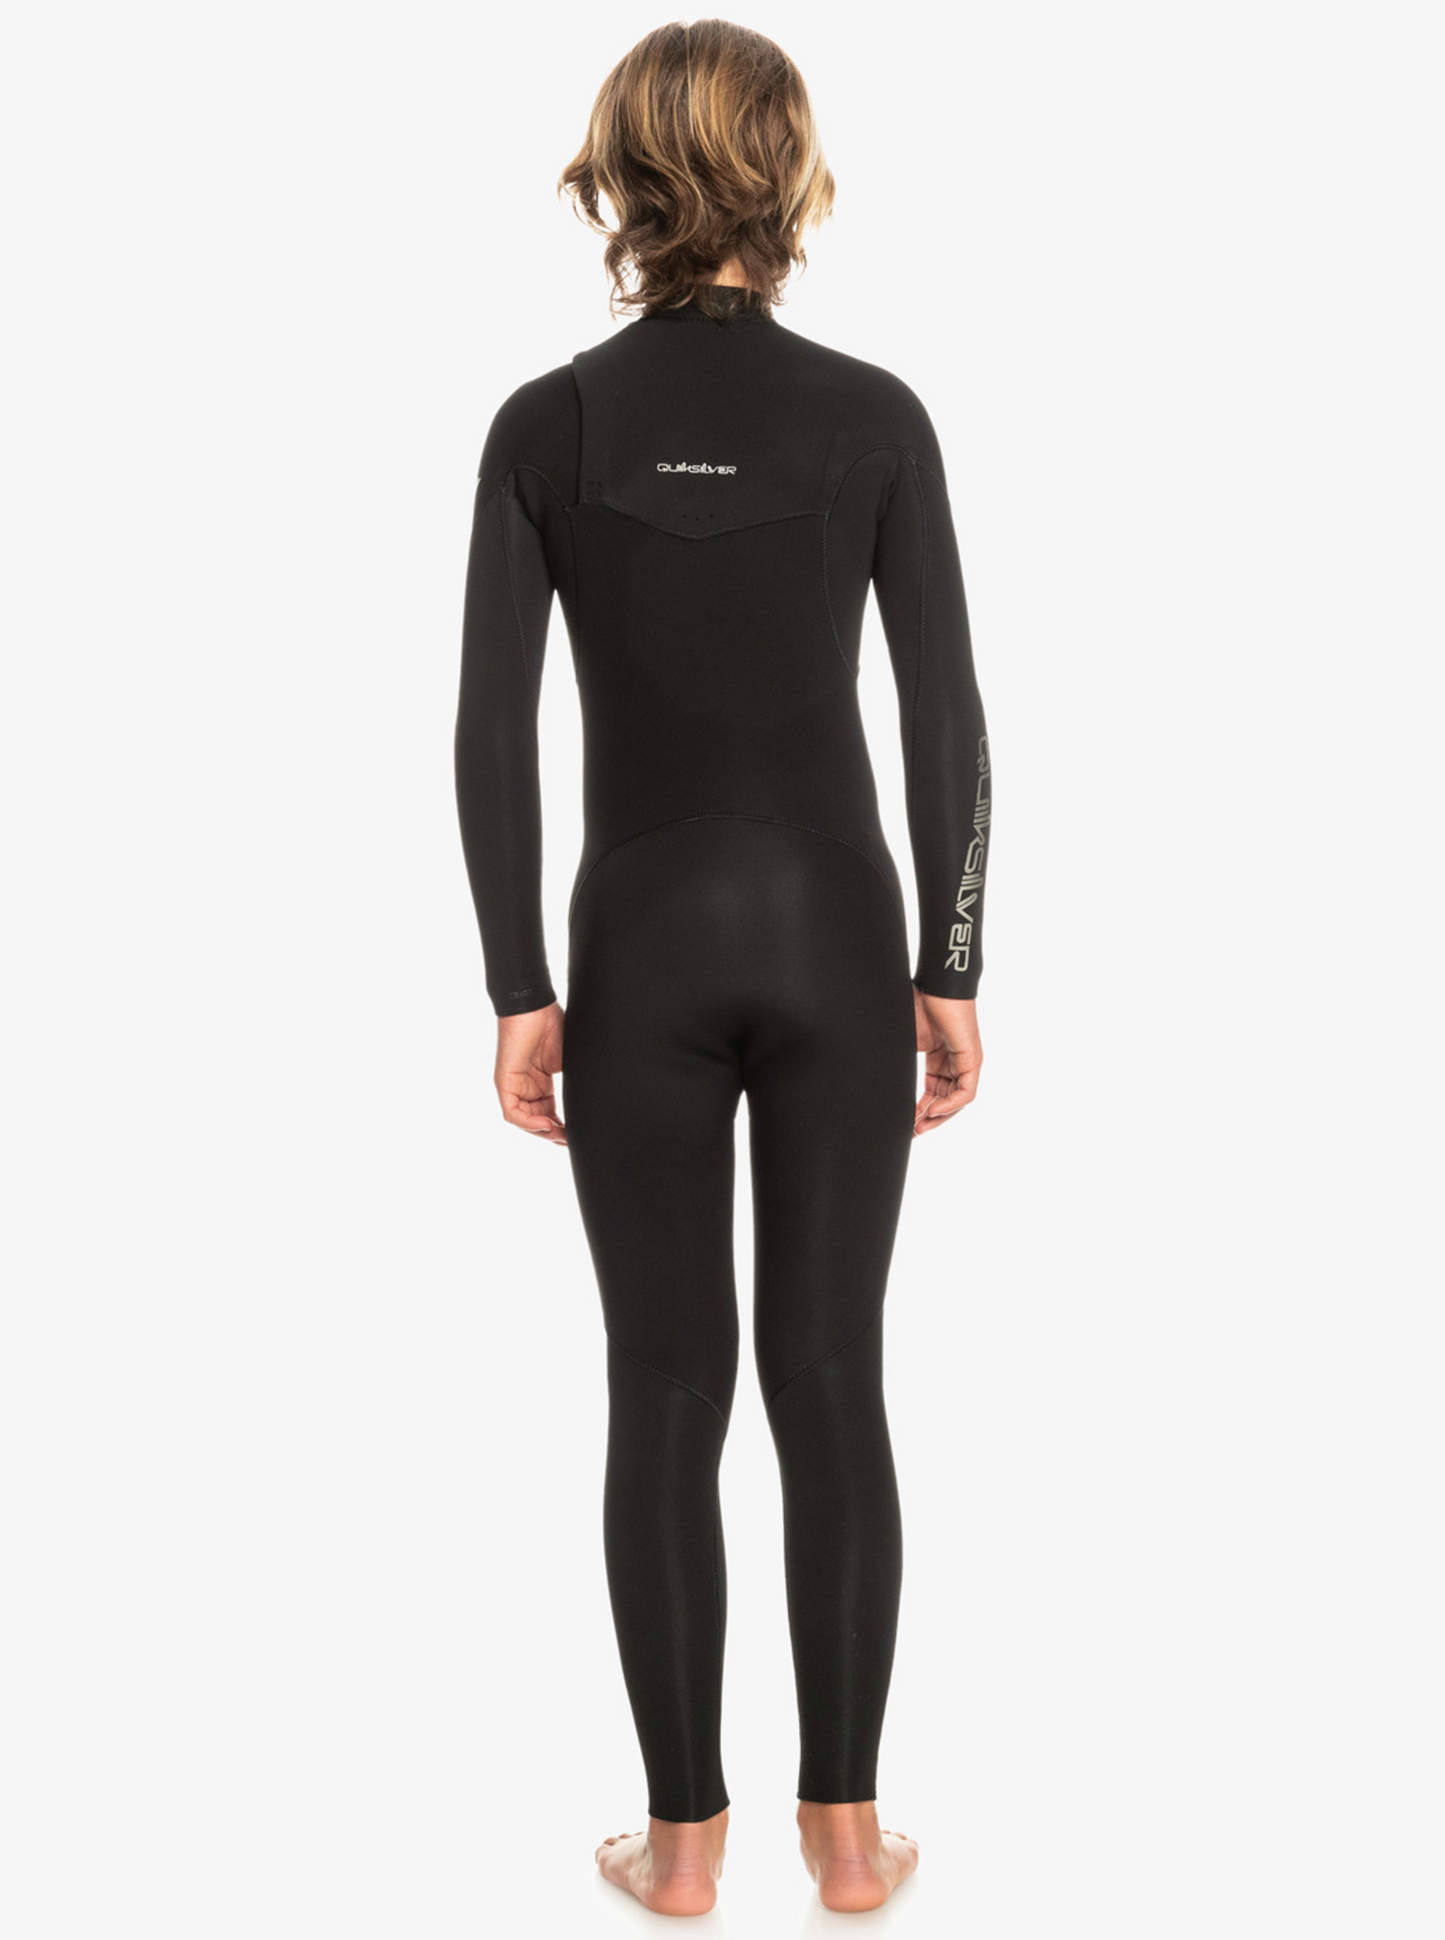 Quiksilver Boys Everyday Sessions 3/2Mm Chest Zip Wetsuit F23